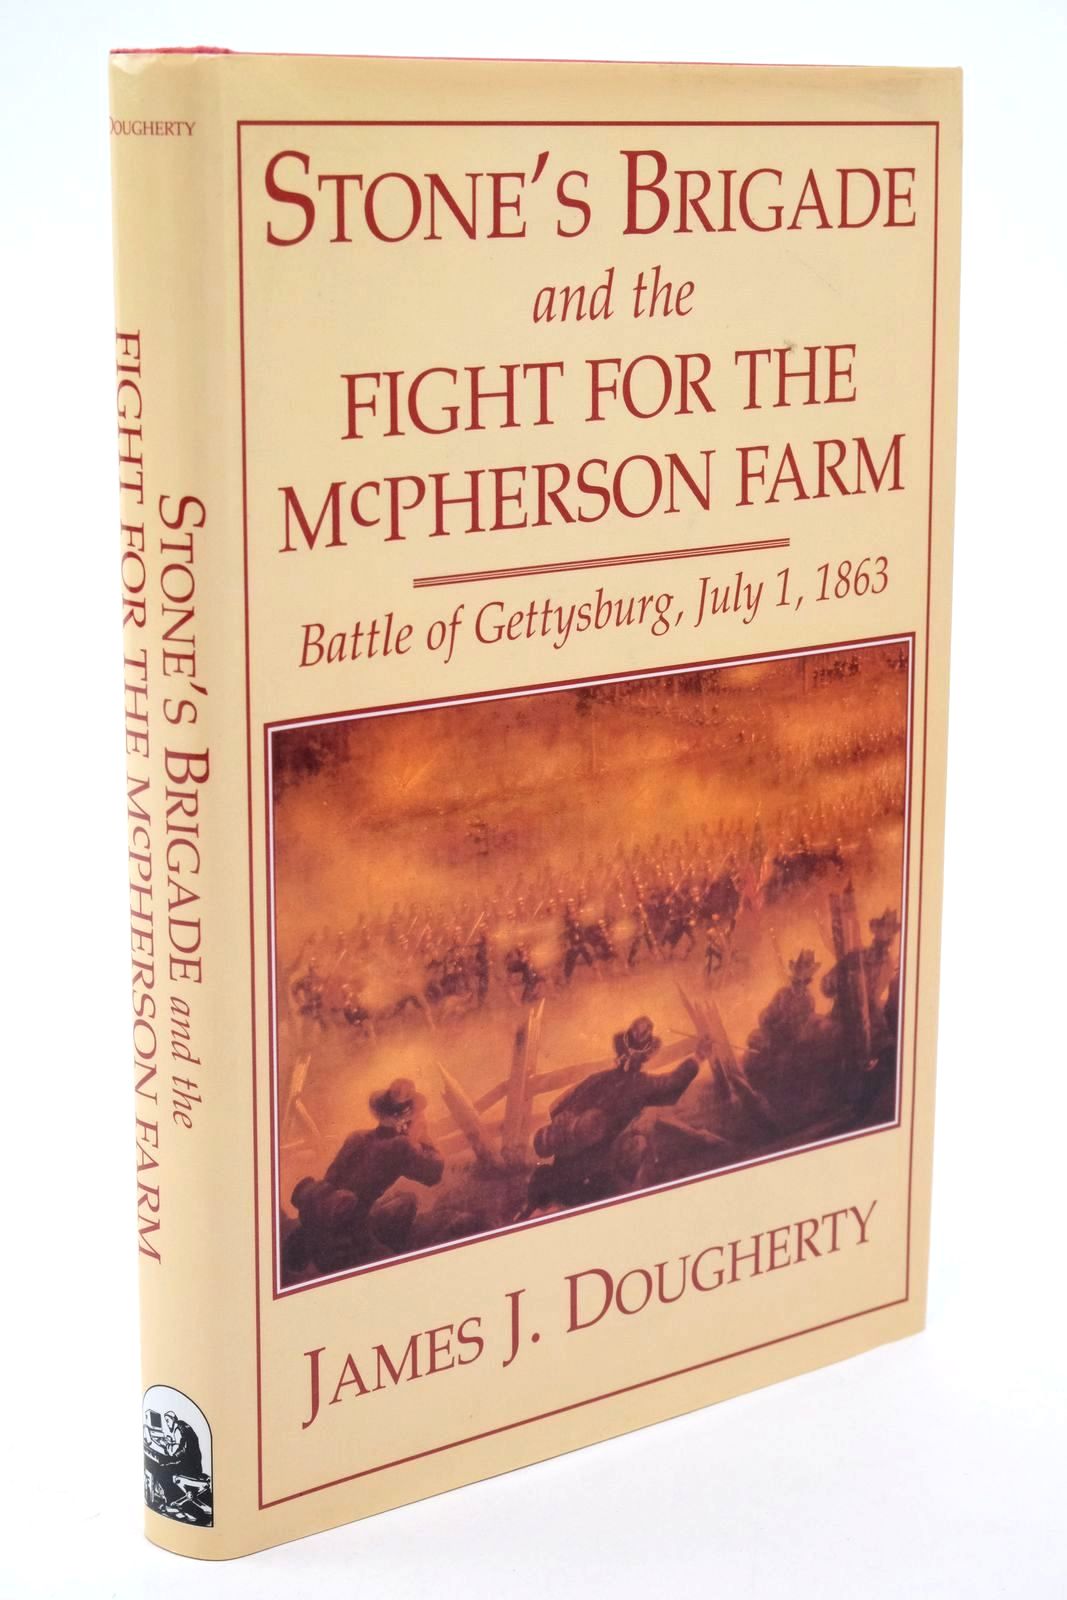 Photo of STONE'S BRIGADE AND THE FIGHT FOR THE MCPHERSON FARM written by Dougherty, James J. published by Combined Publishing (STOCK CODE: 1322545)  for sale by Stella & Rose's Books